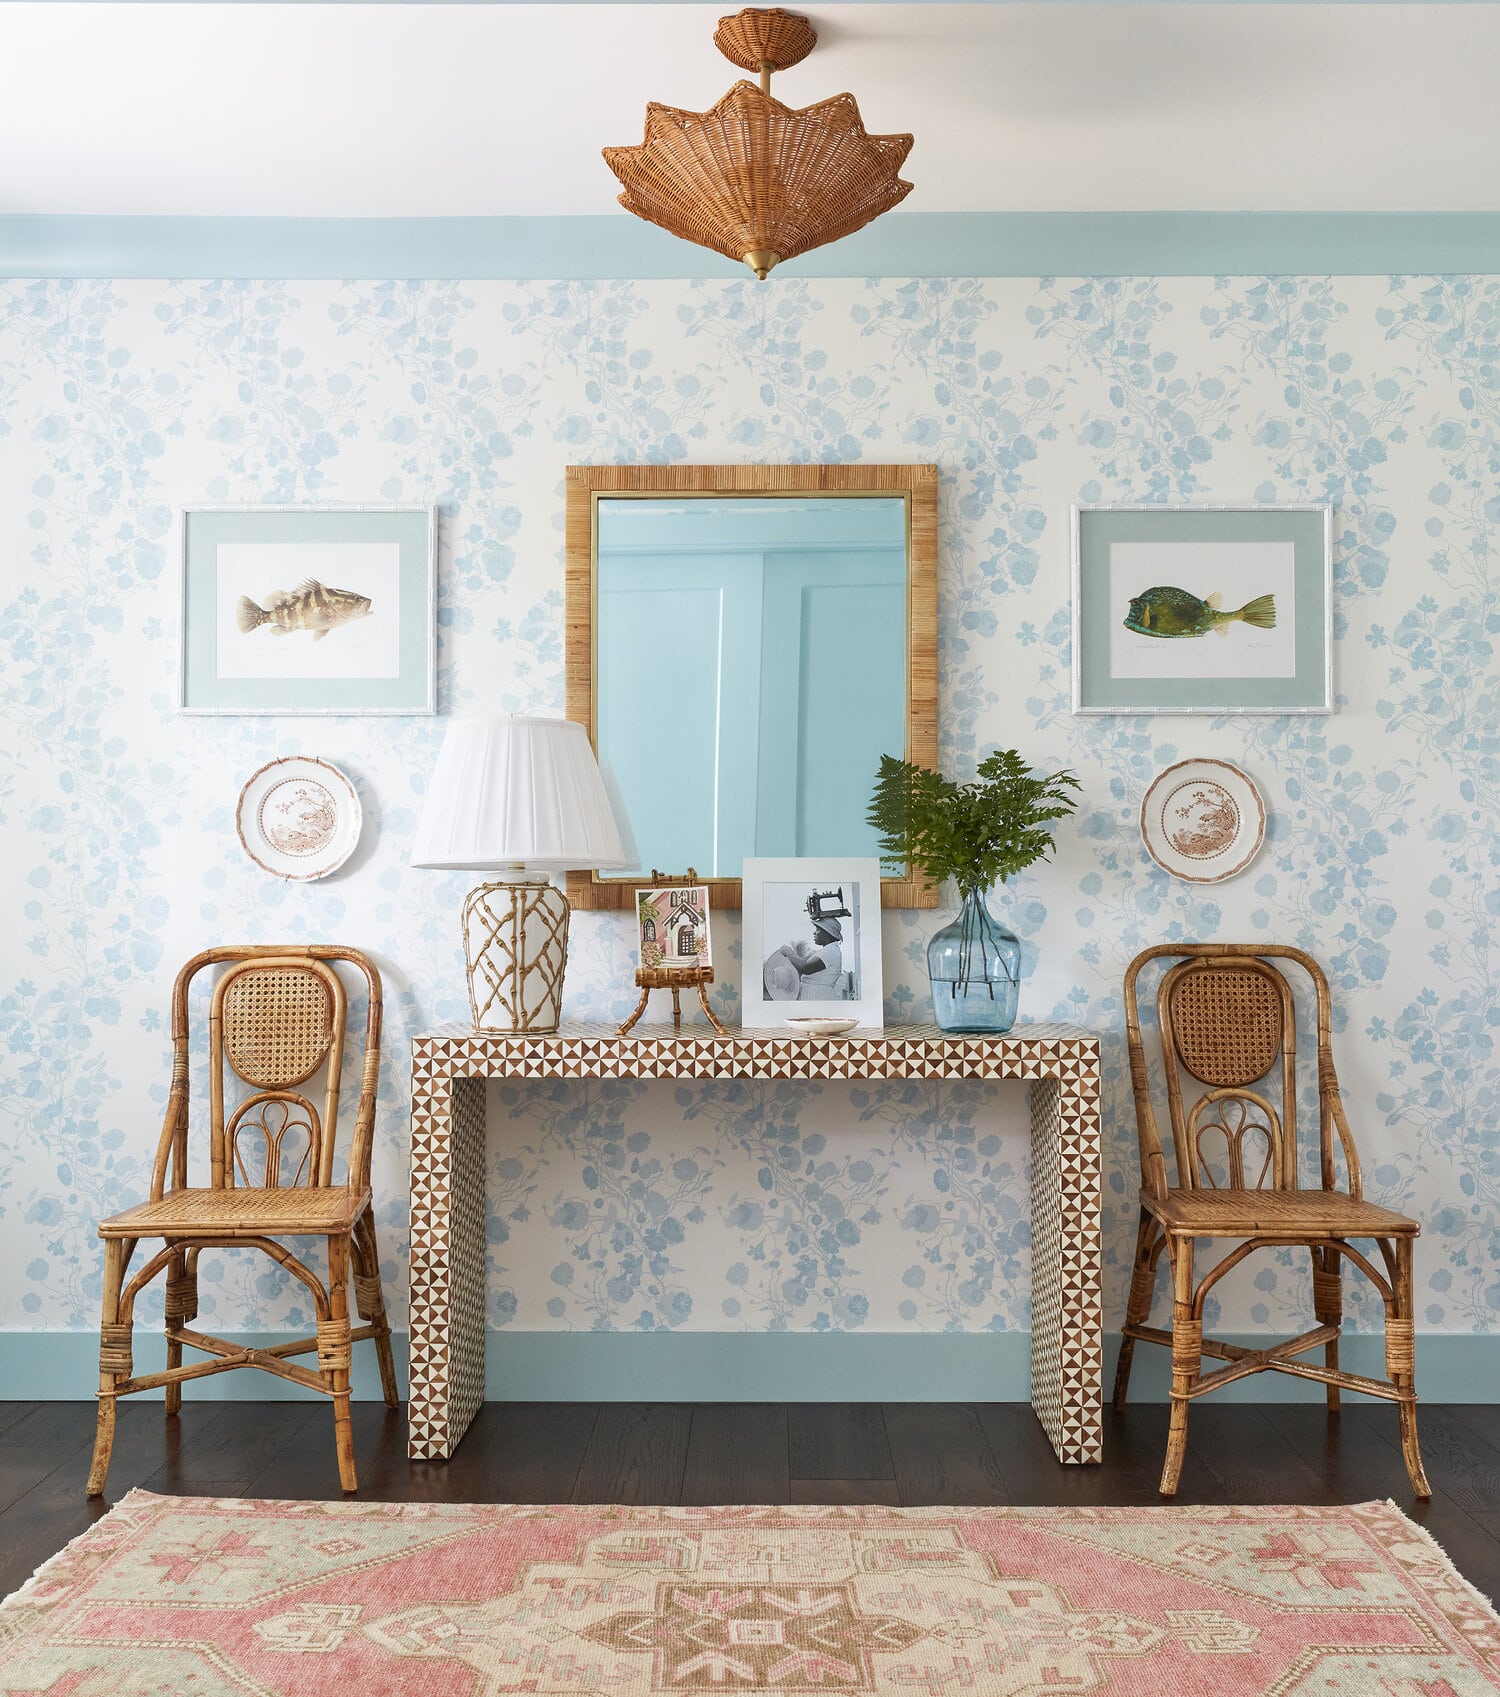 Turtle Creek beach house designed by Kara Miller | Brantley Photography - blue and white wallpaper - bamboo - bamboo chairs 